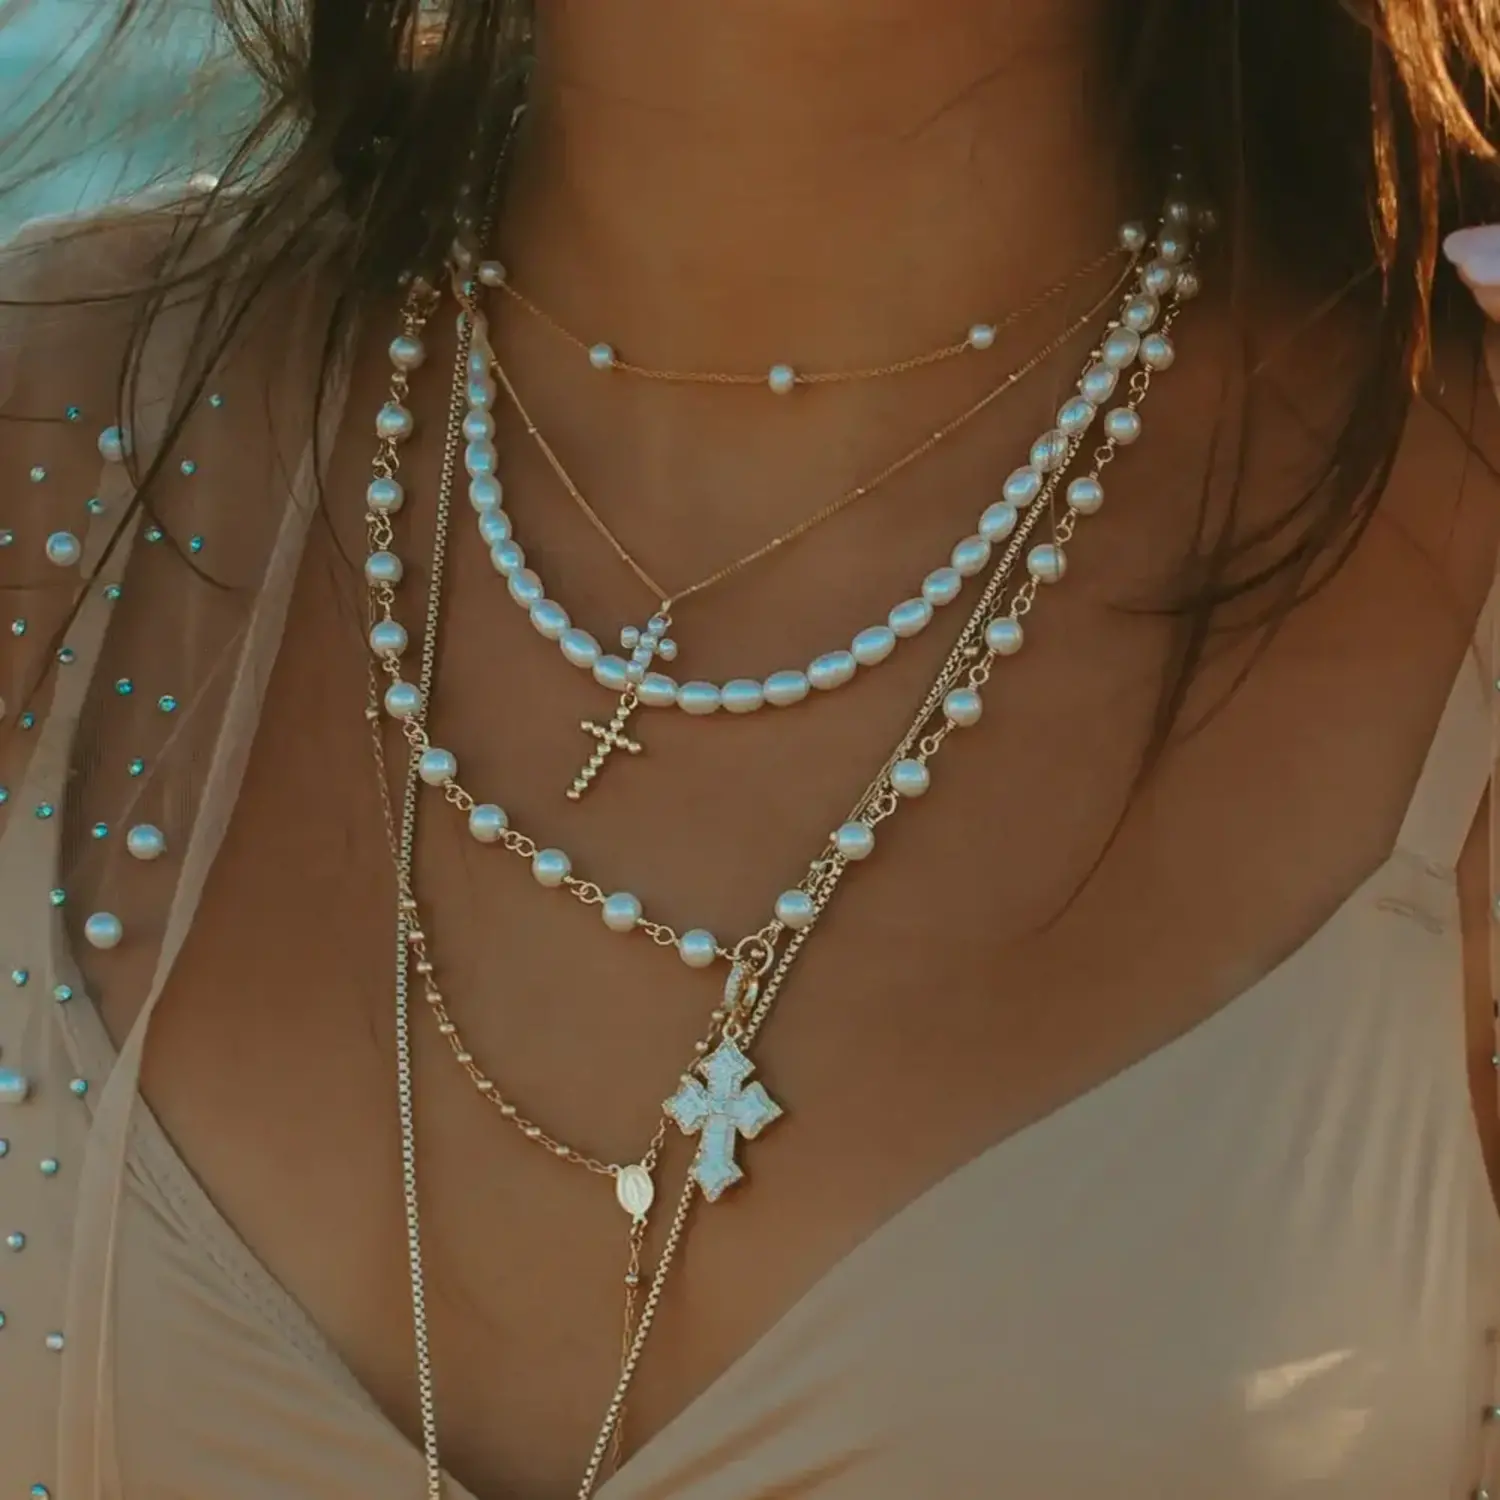 Elegant Baby Baroque pearl necklace with gold accents – Barb McSweeney  Jewelry